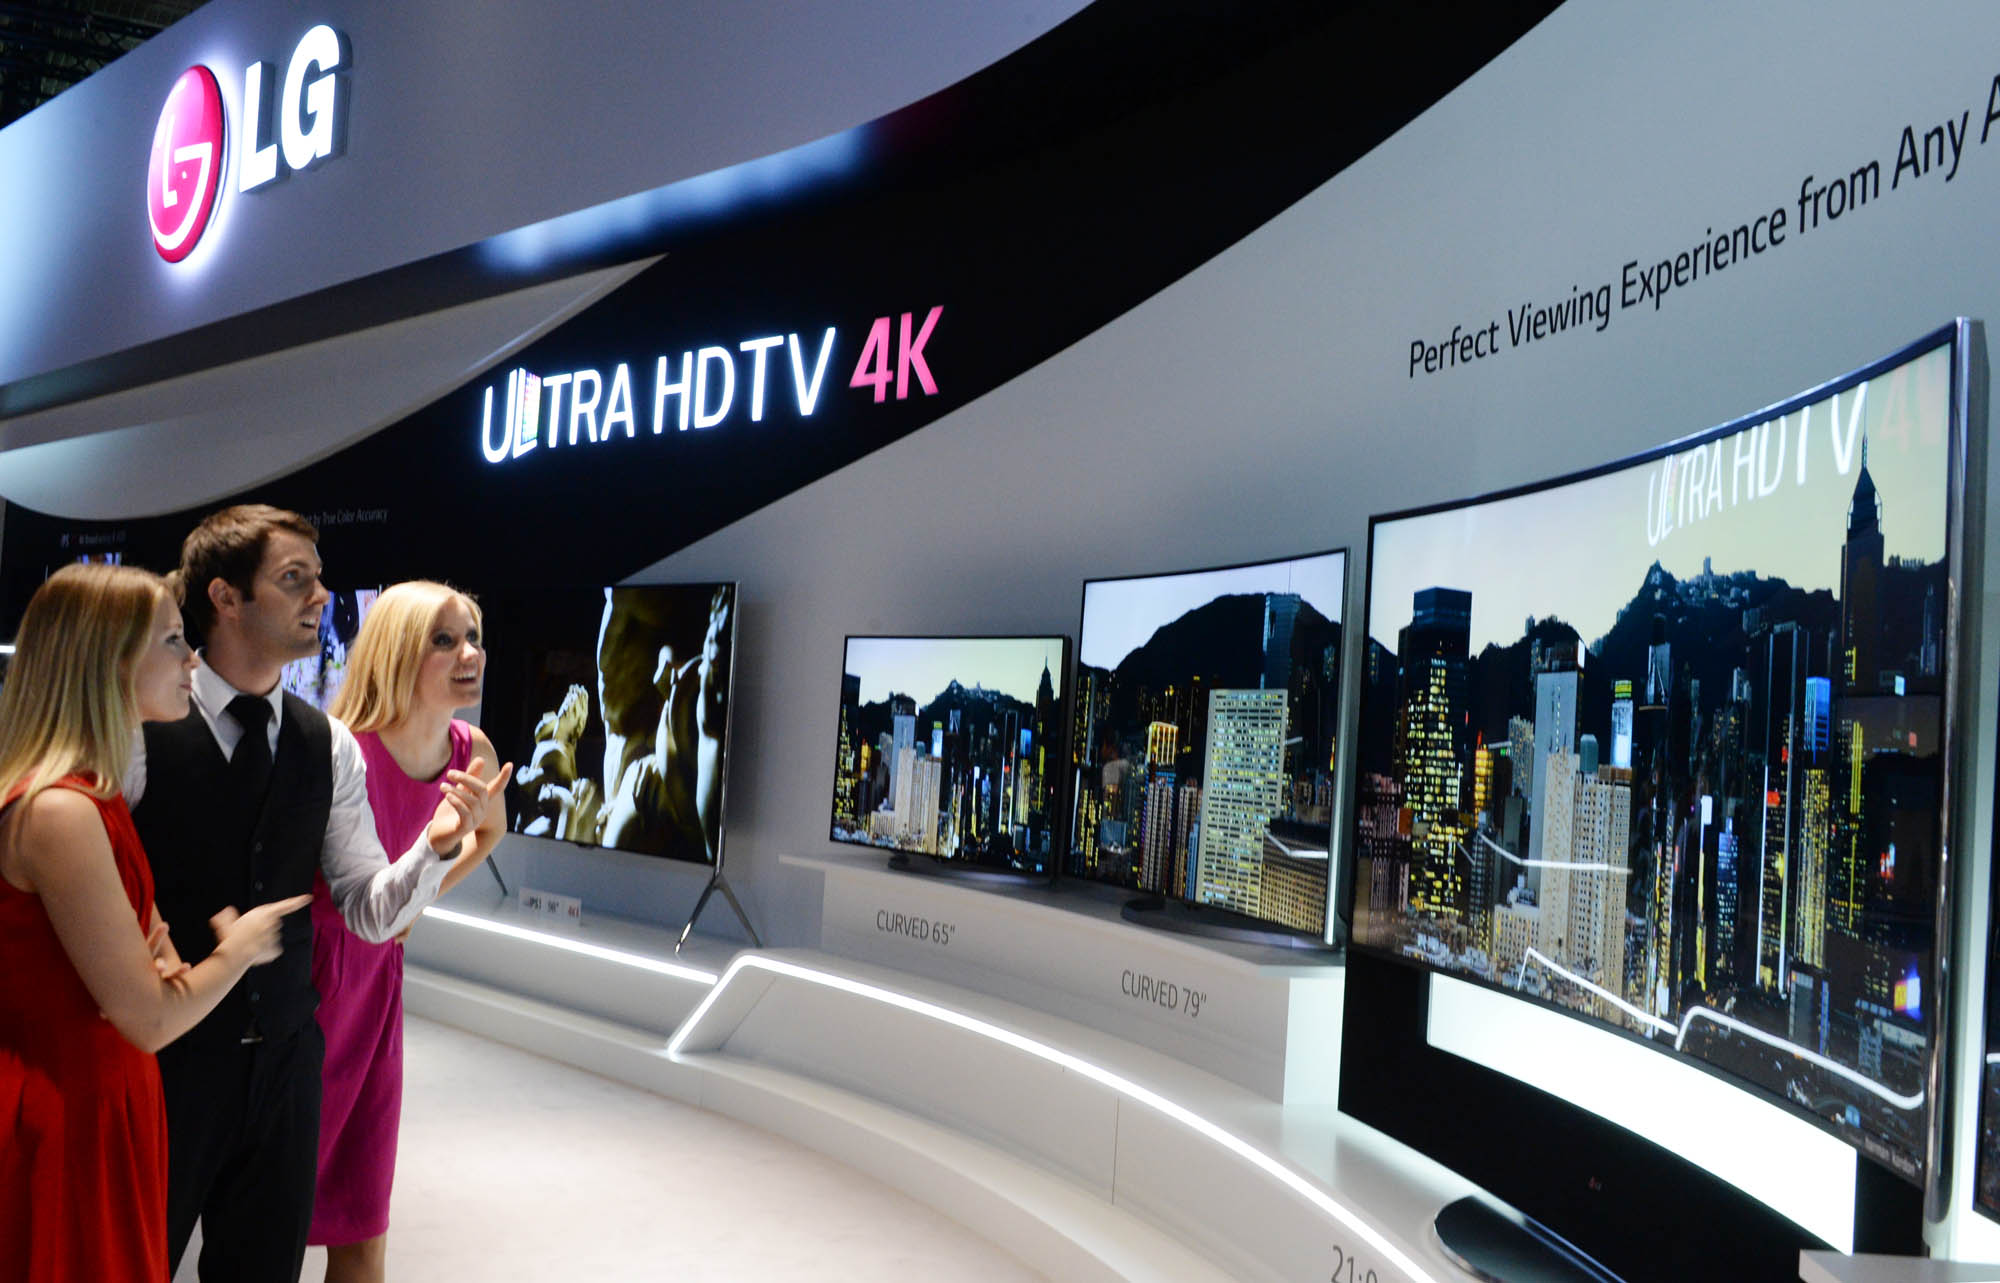 Ahead of IFA 2014, LG Electronics is gearing up to unveil a spectacular product line-up to demonstrate just how integrated LG has become in consumers’ lives. (image credit: LG Electronics)